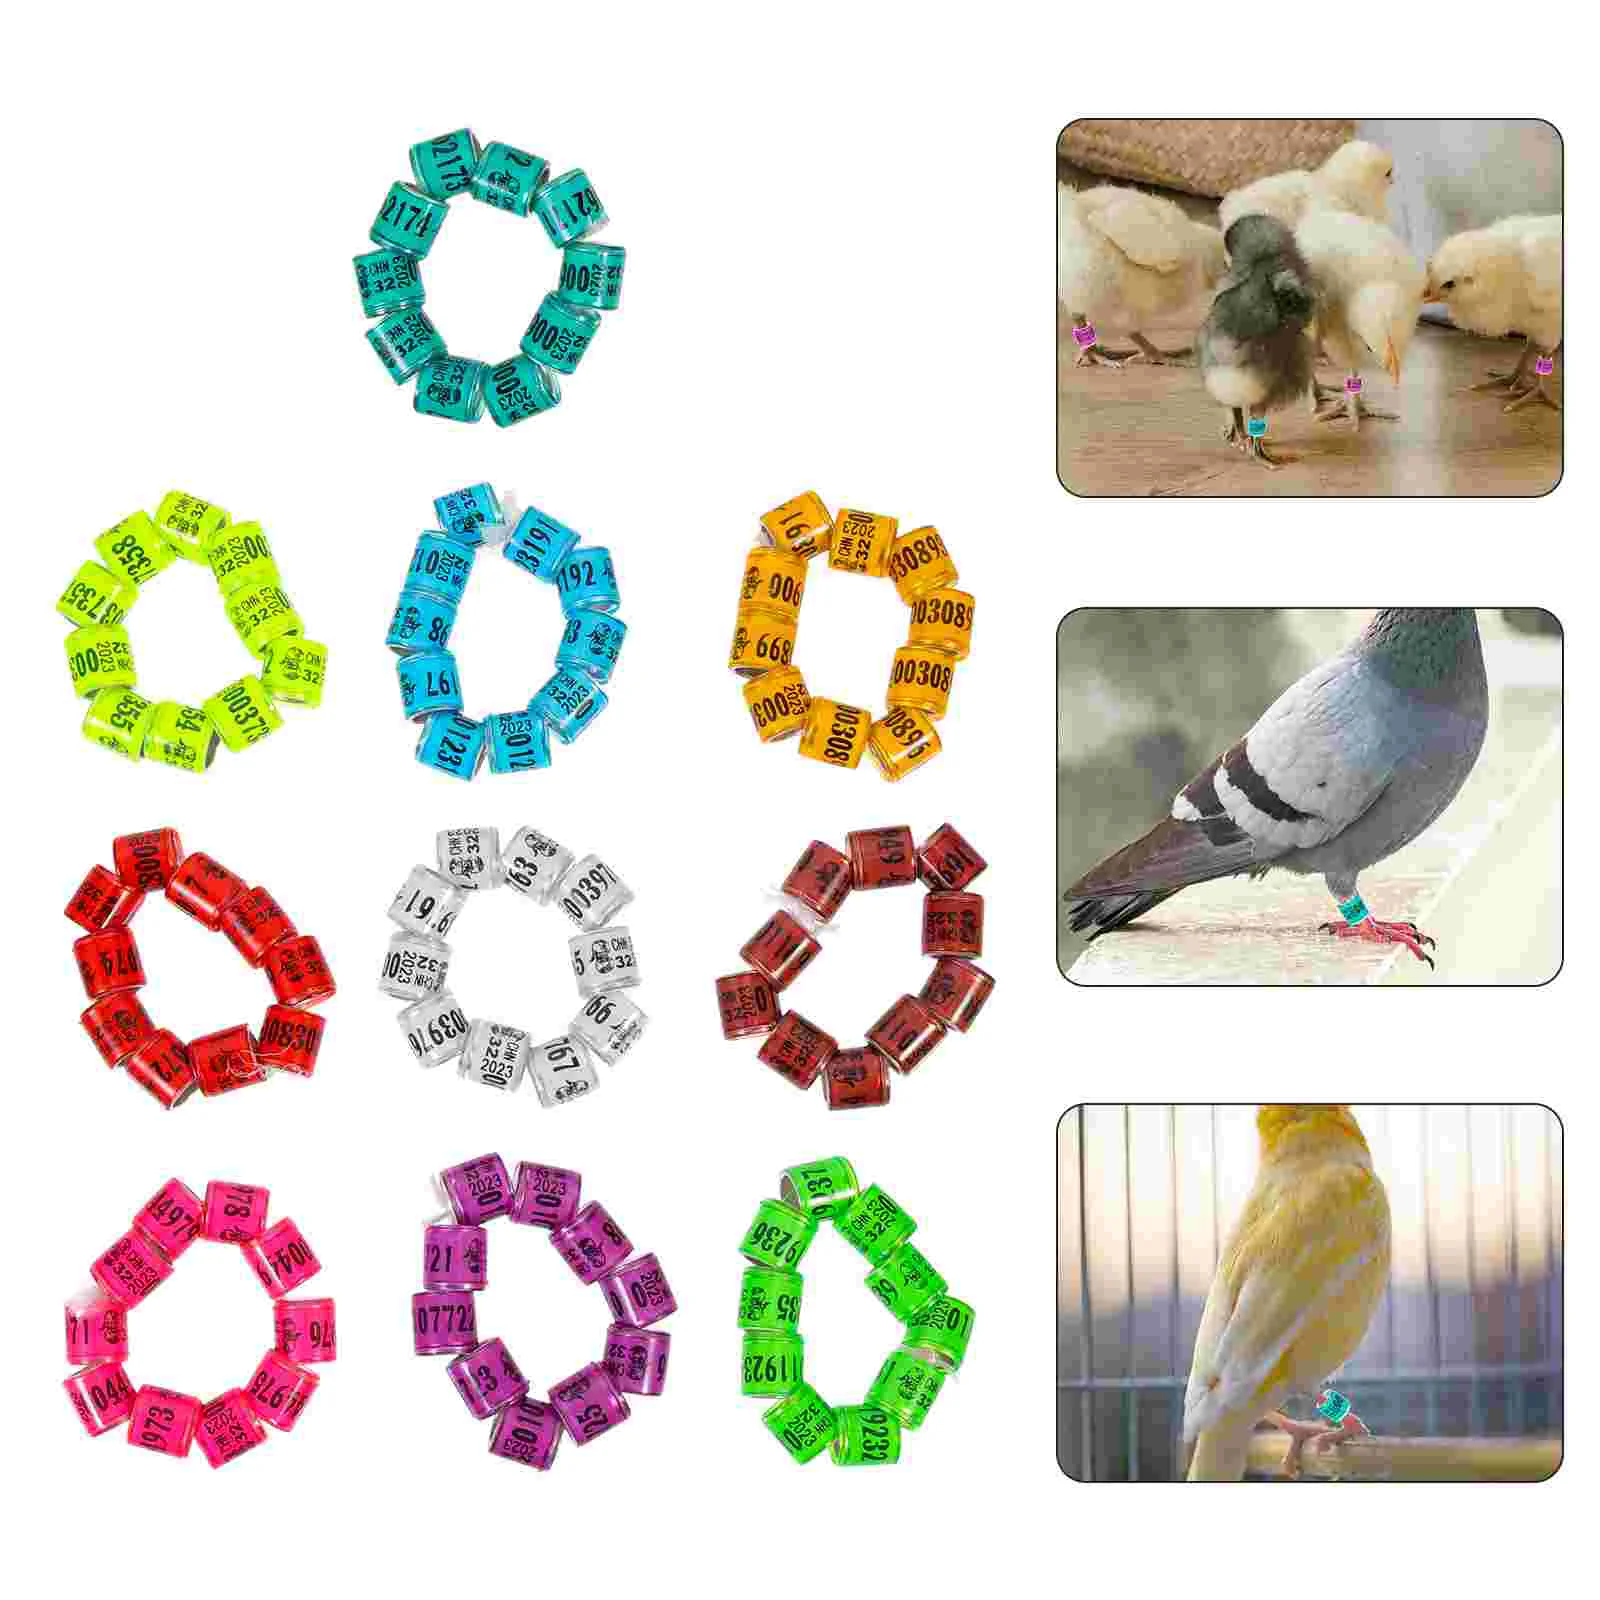 

Leg Pigeon Rings Bands Bird Foot Chicken Marker Band Pigeons Private Supplies Small Pet Poultry Identify Ring Distinguish Racing